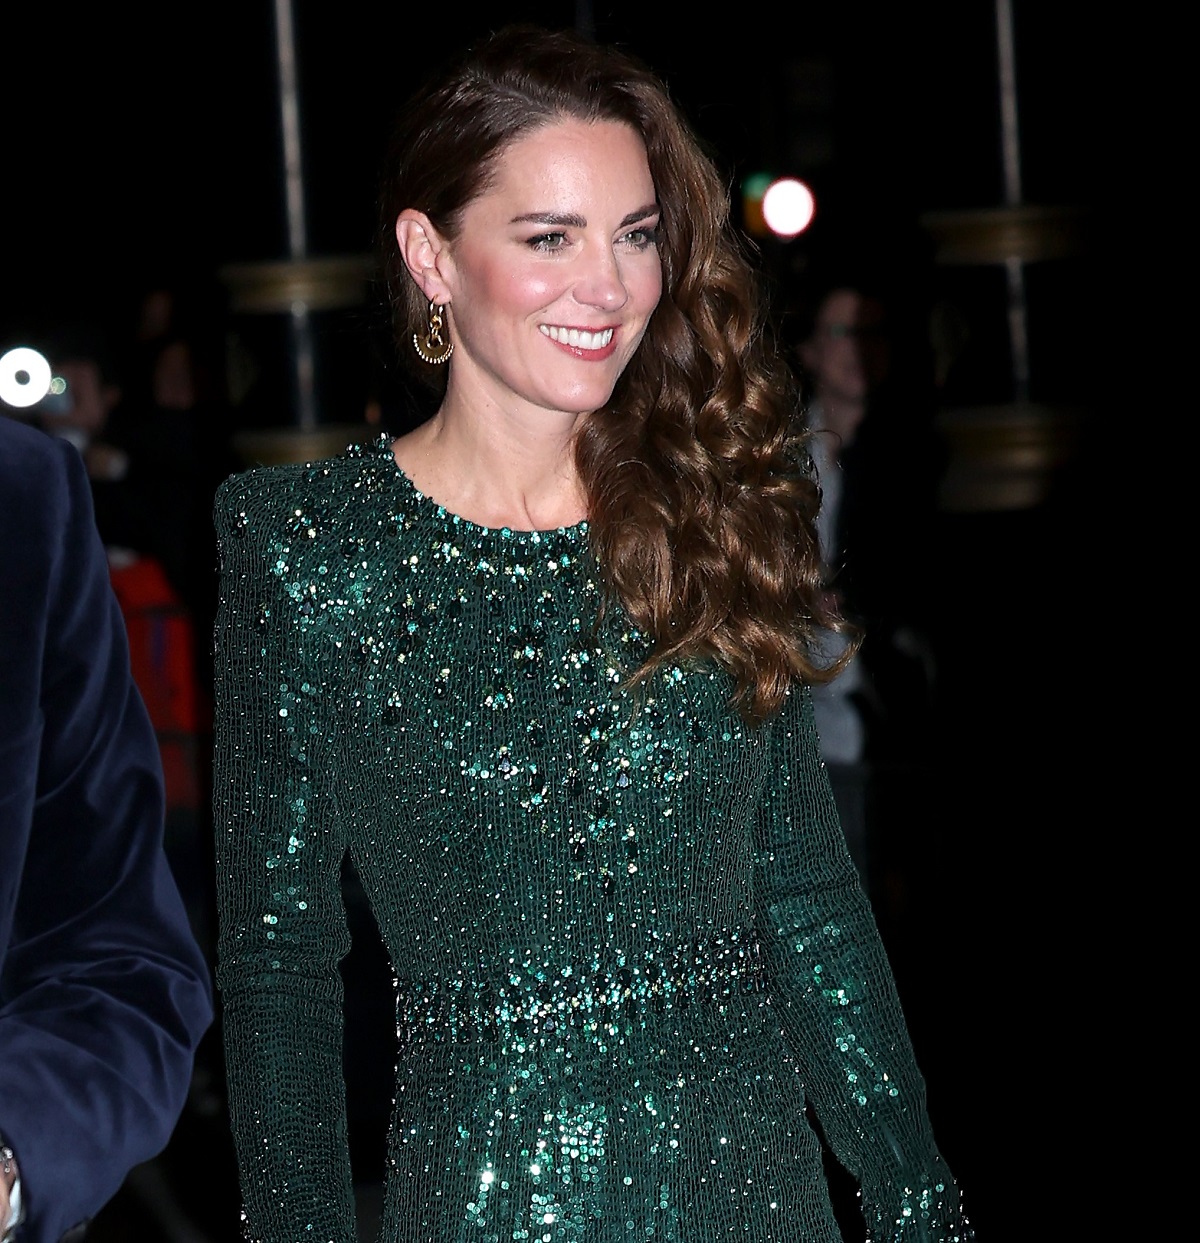 Kate Middleton wearing a sparkling green gown and smiling as she arrives at the Royal Variety Performance